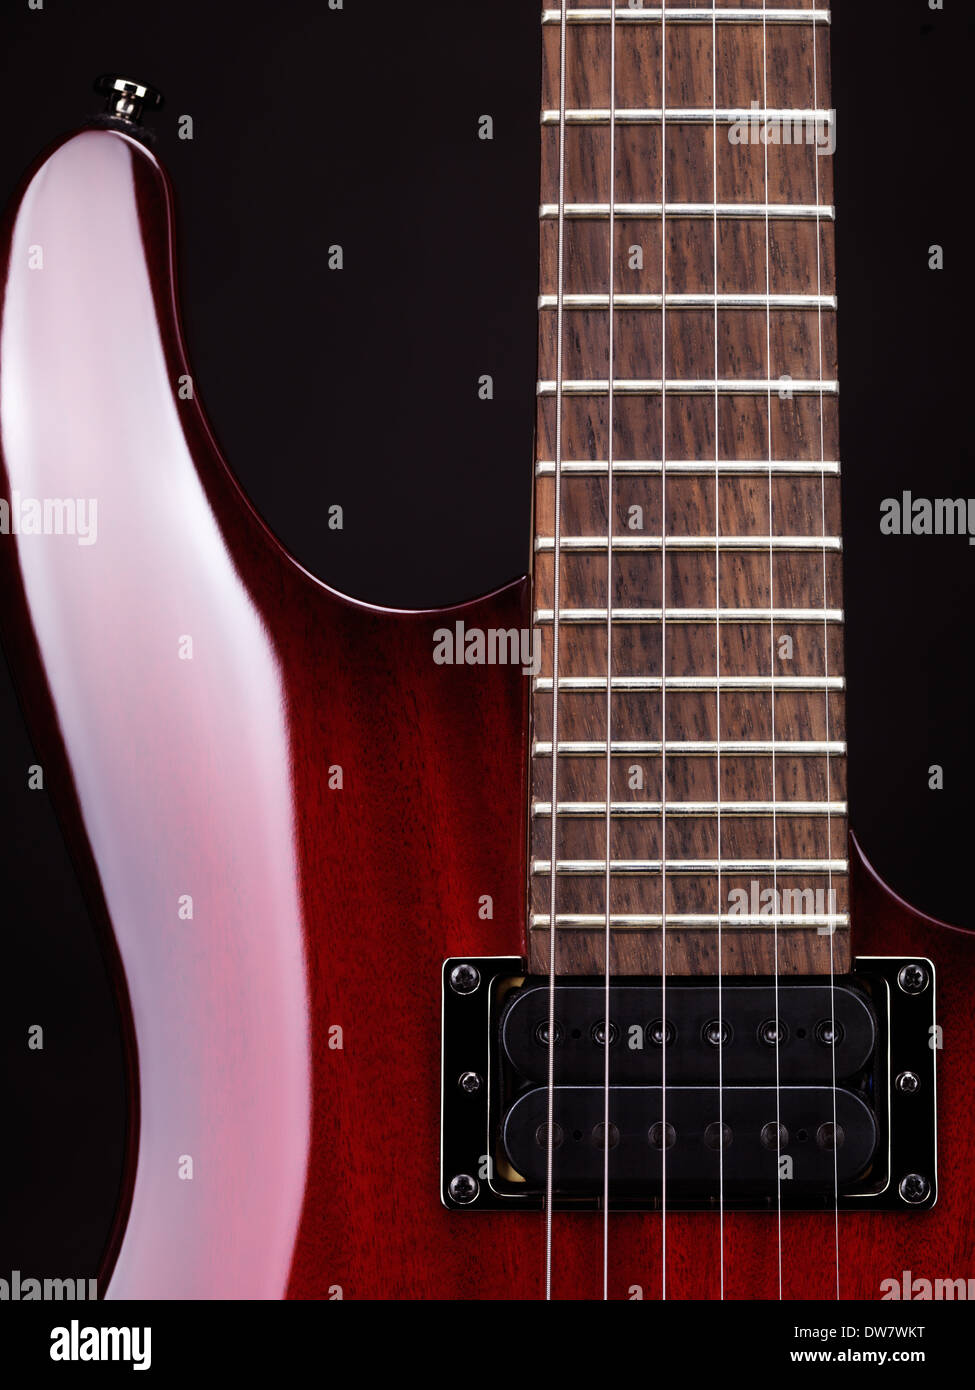 Closeup of electric guitar neck, strings and pickup Stock Photo